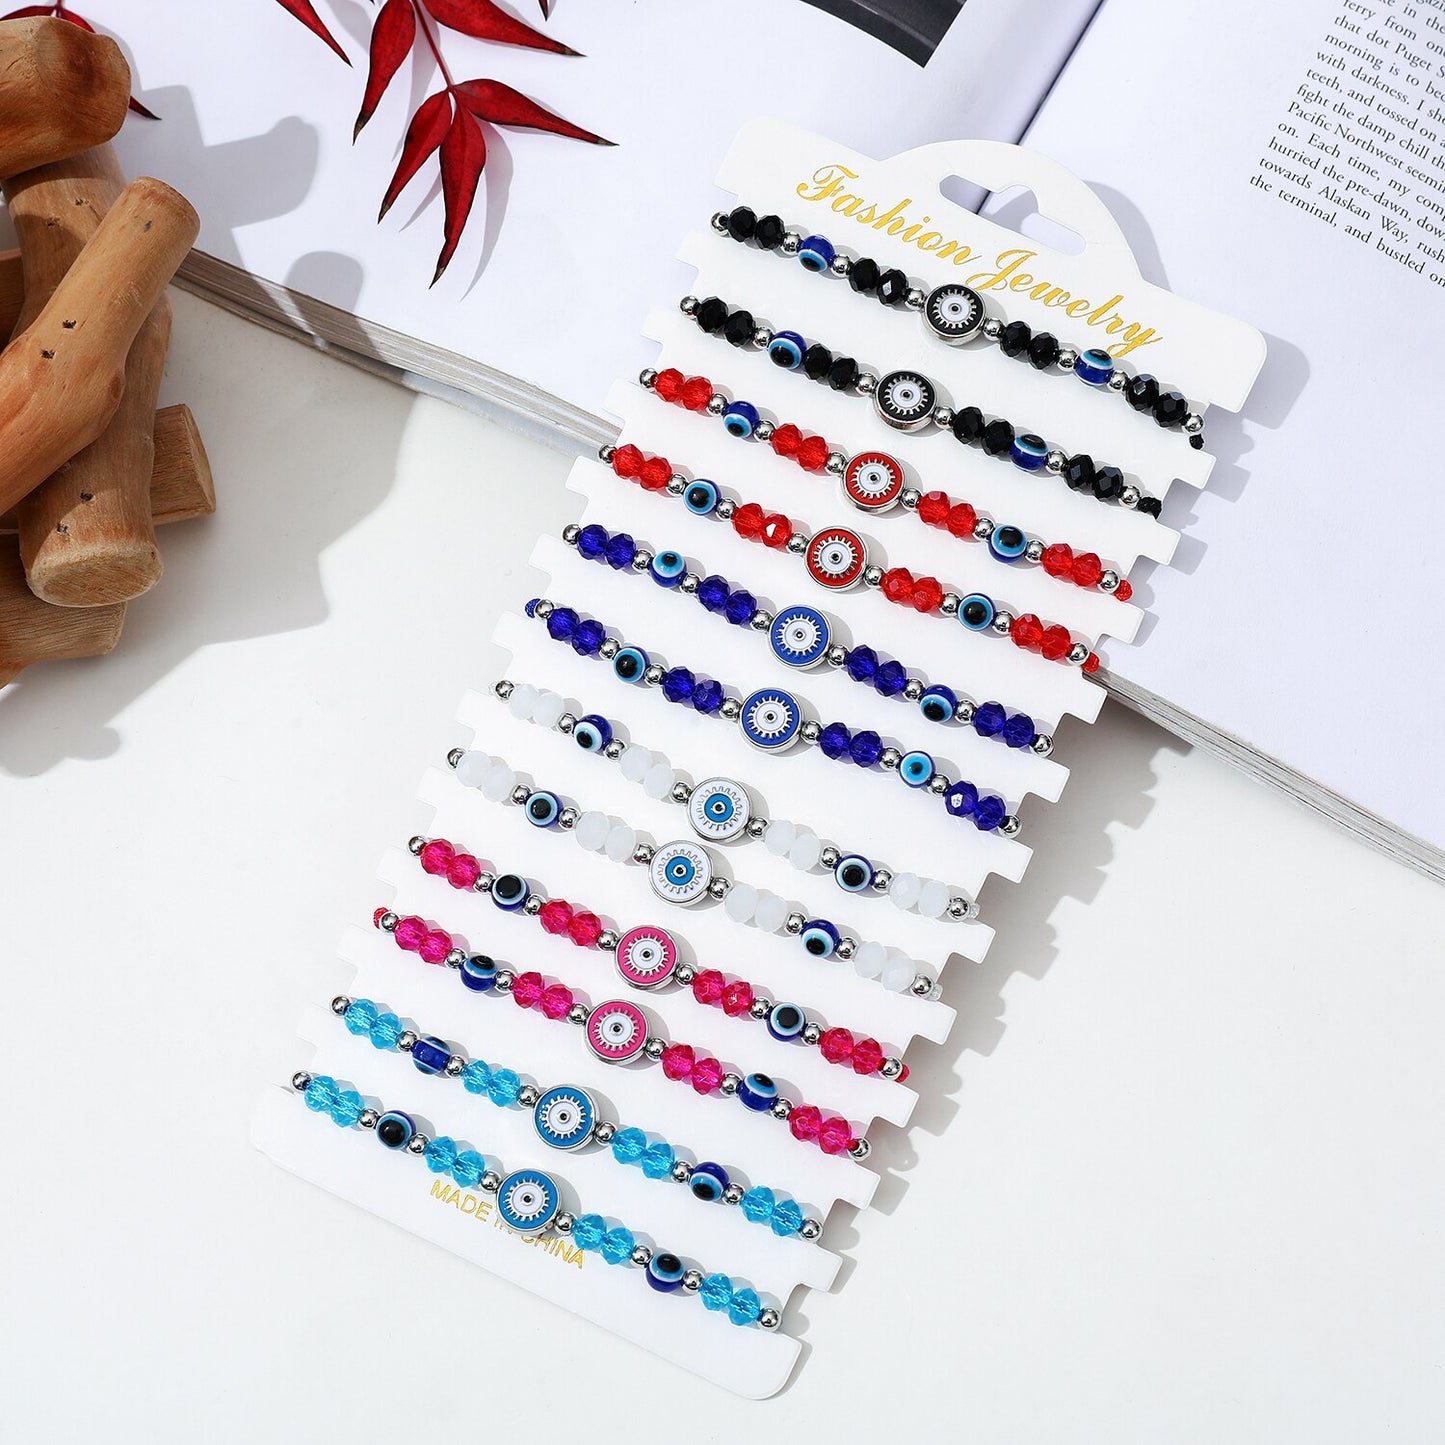 12 Pieces Colorful Crystal Evil Eye Beaded Charms Bracelets for Women Adjustable Beads Anklets Child Girl Wristband Cuff Jewelry